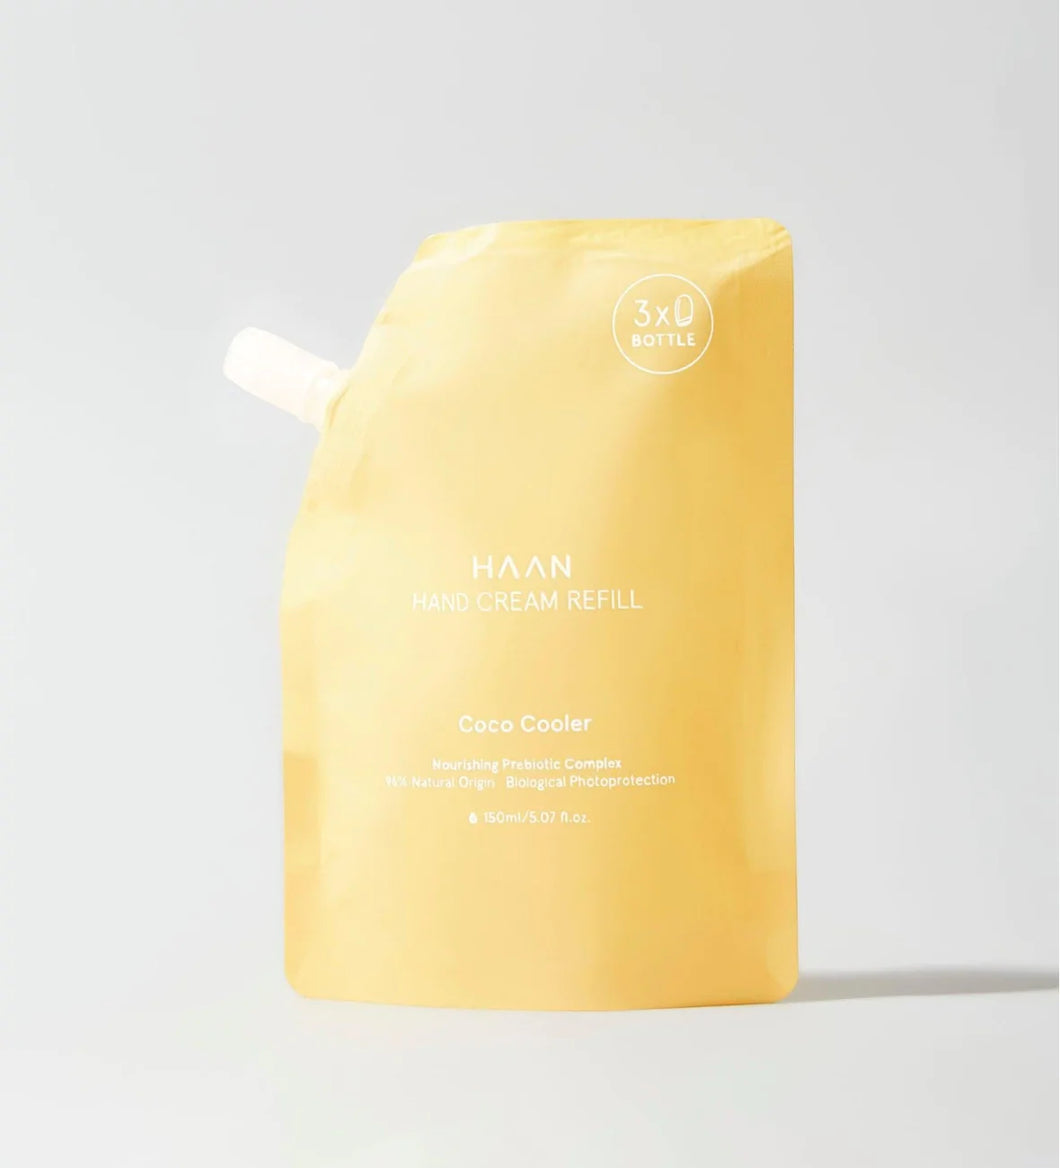 HAAN - Natural Hand Cream Refill Pouch Coco Cooler 150ml